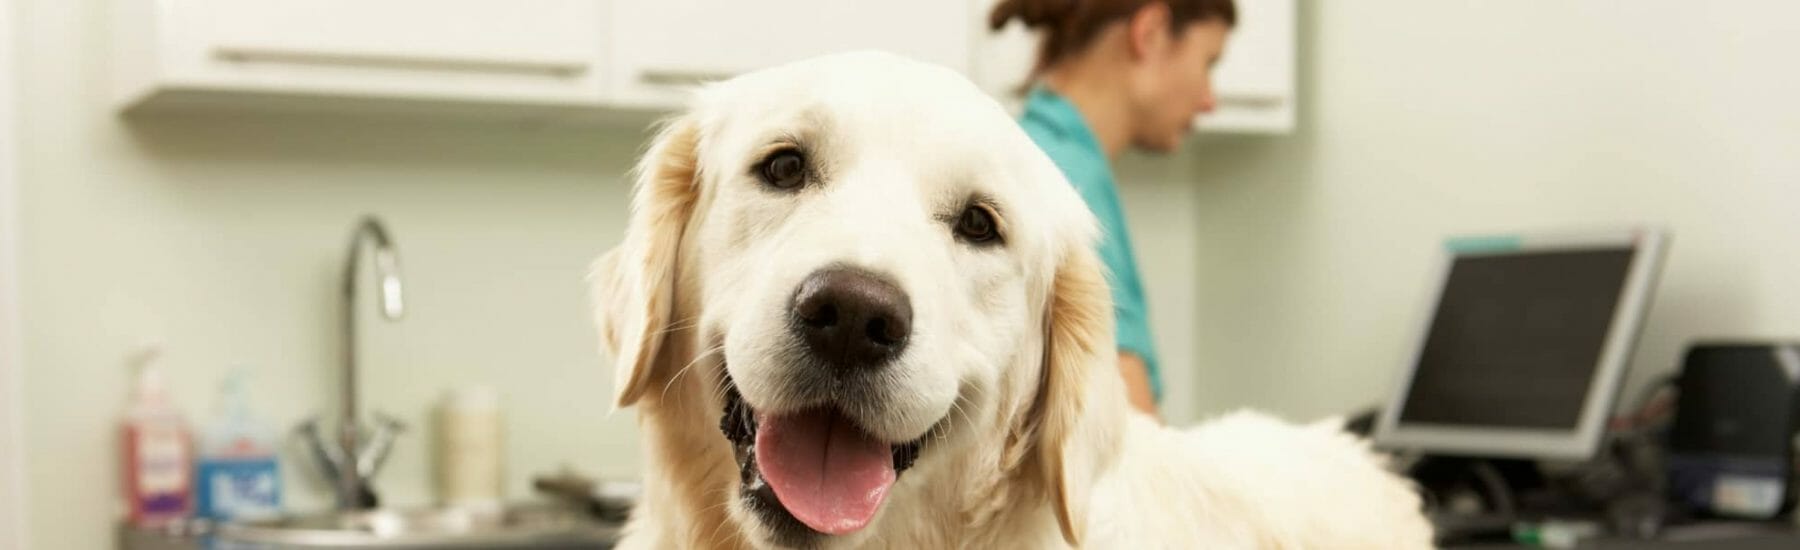 Dog Smiling with Tongue Out with a Vet in the Background